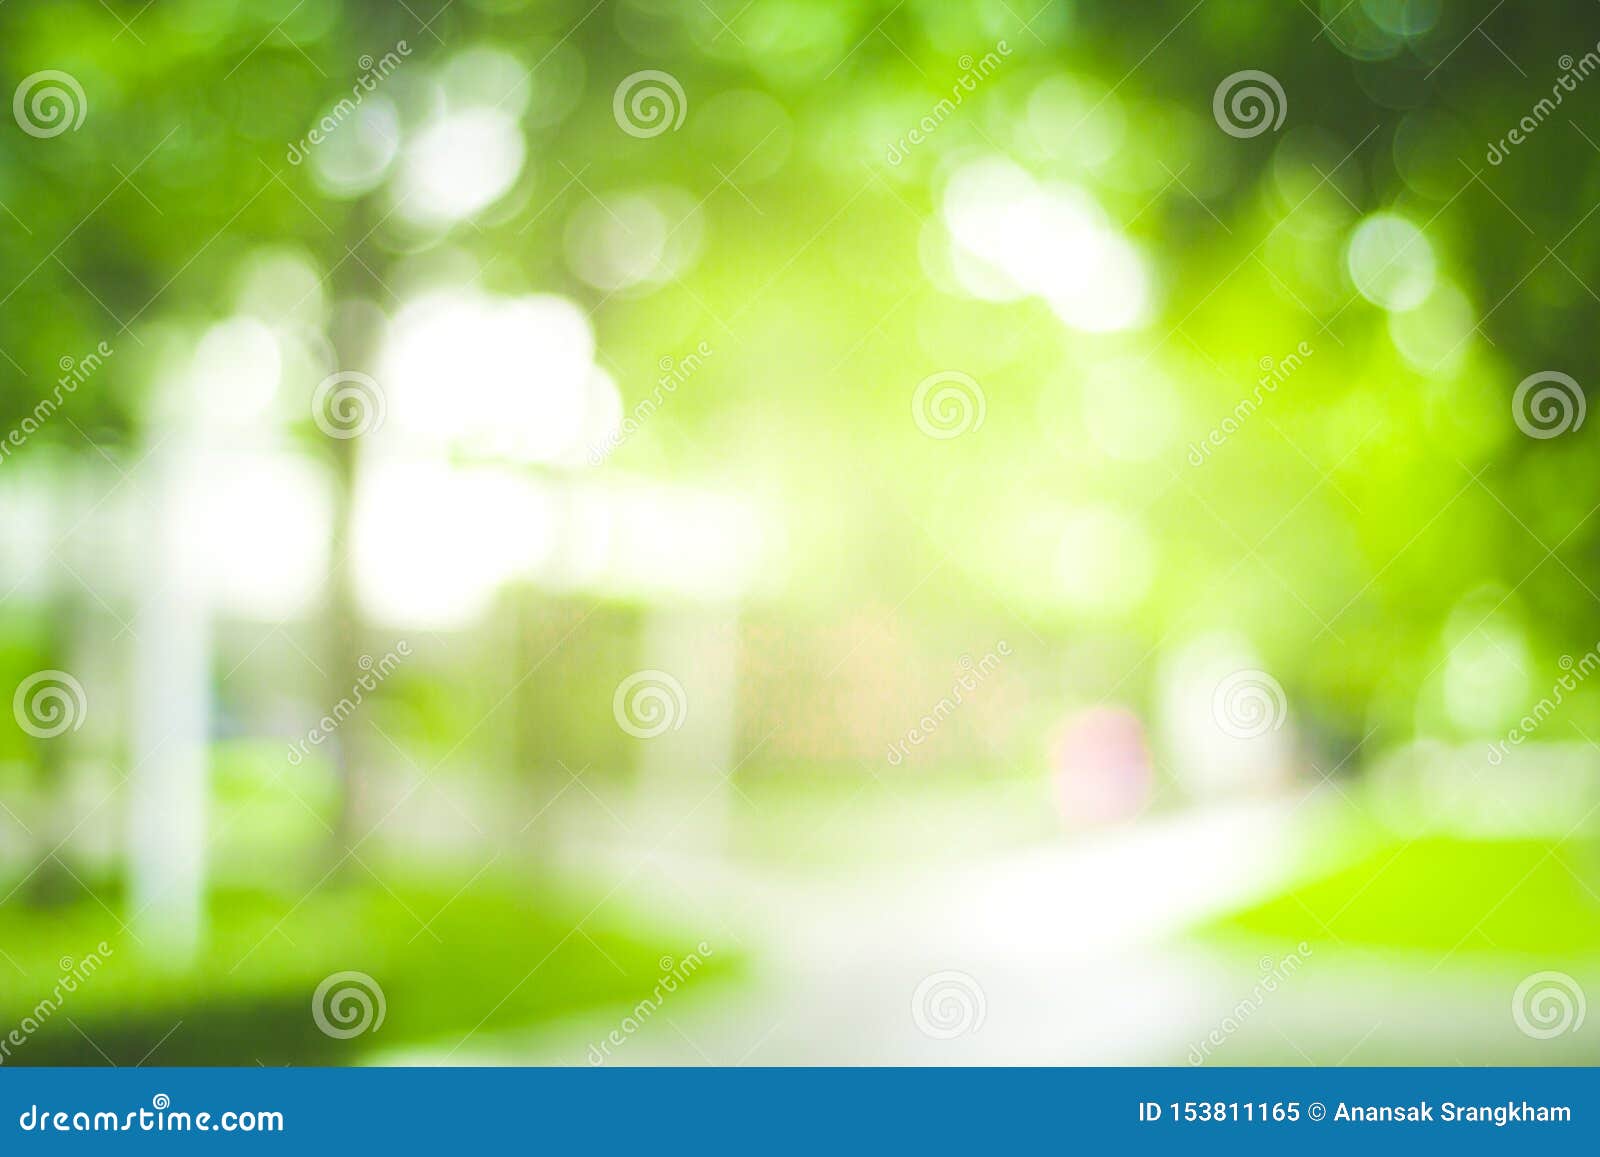 Abstract Green Nature Blur Background and Sunlight Stock Image - Image of  environment, focus: 153811165